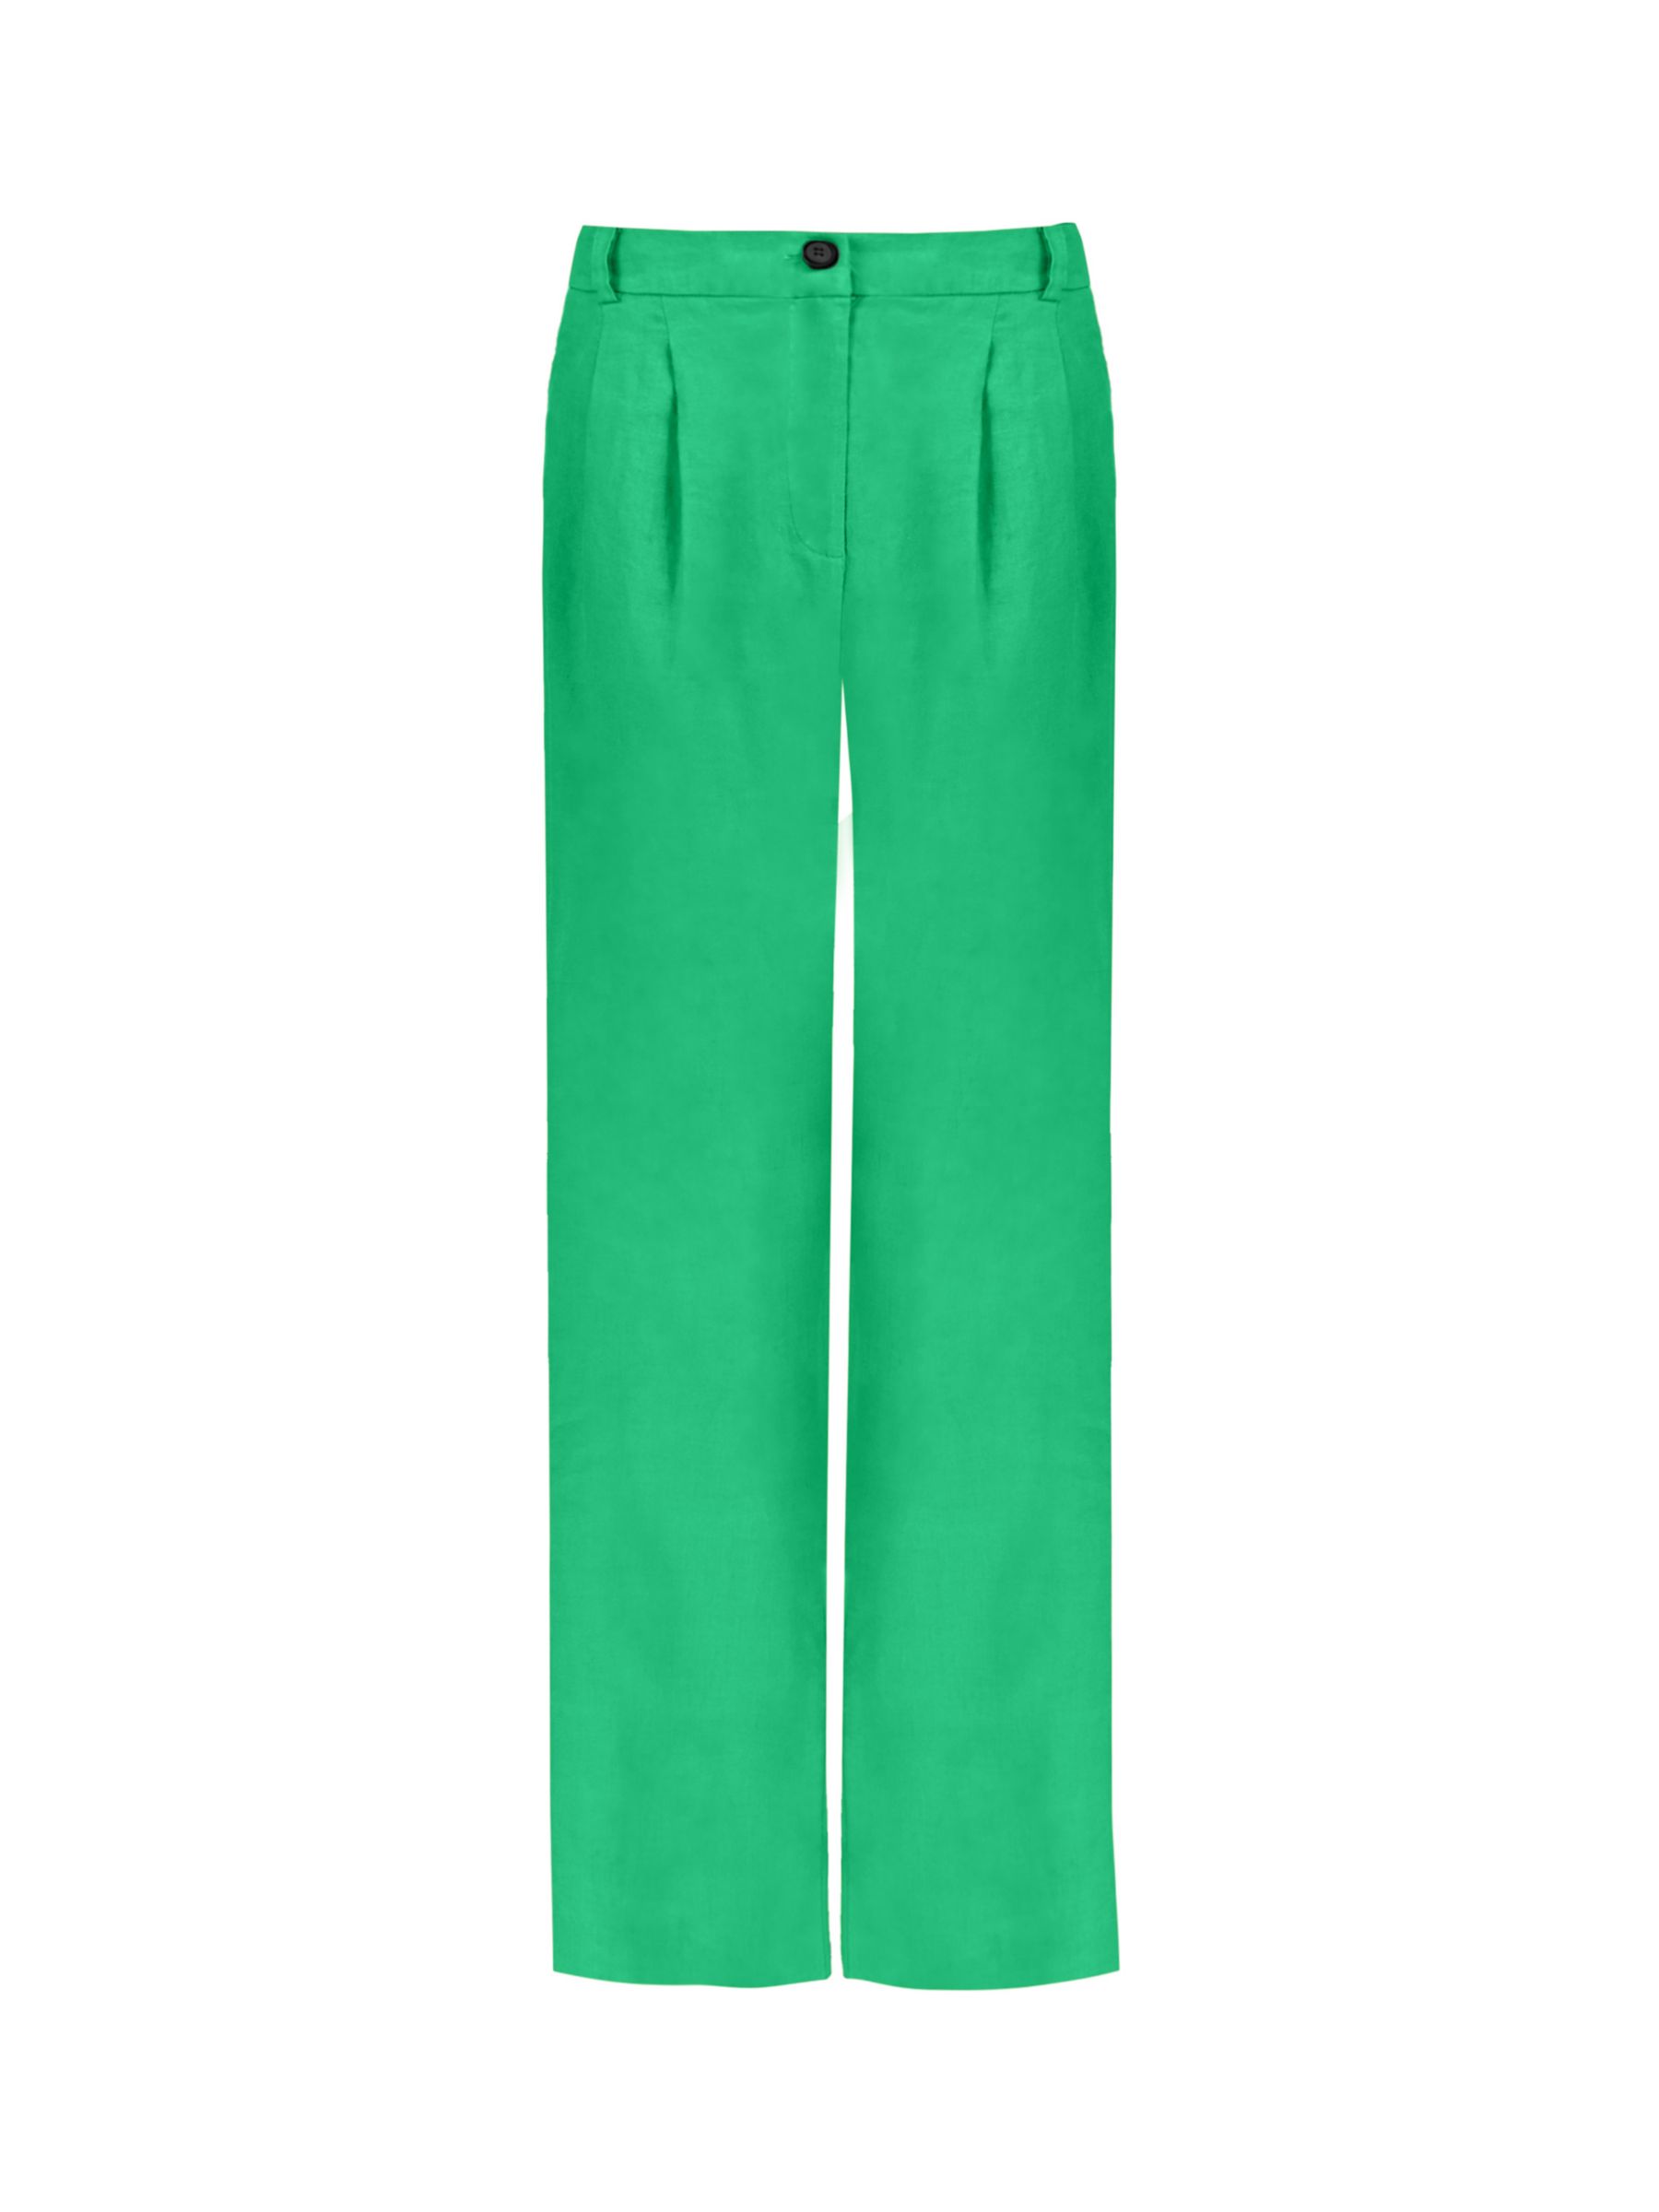 Ro&Zo Button Front Linen Trousers, Green at John Lewis & Partners